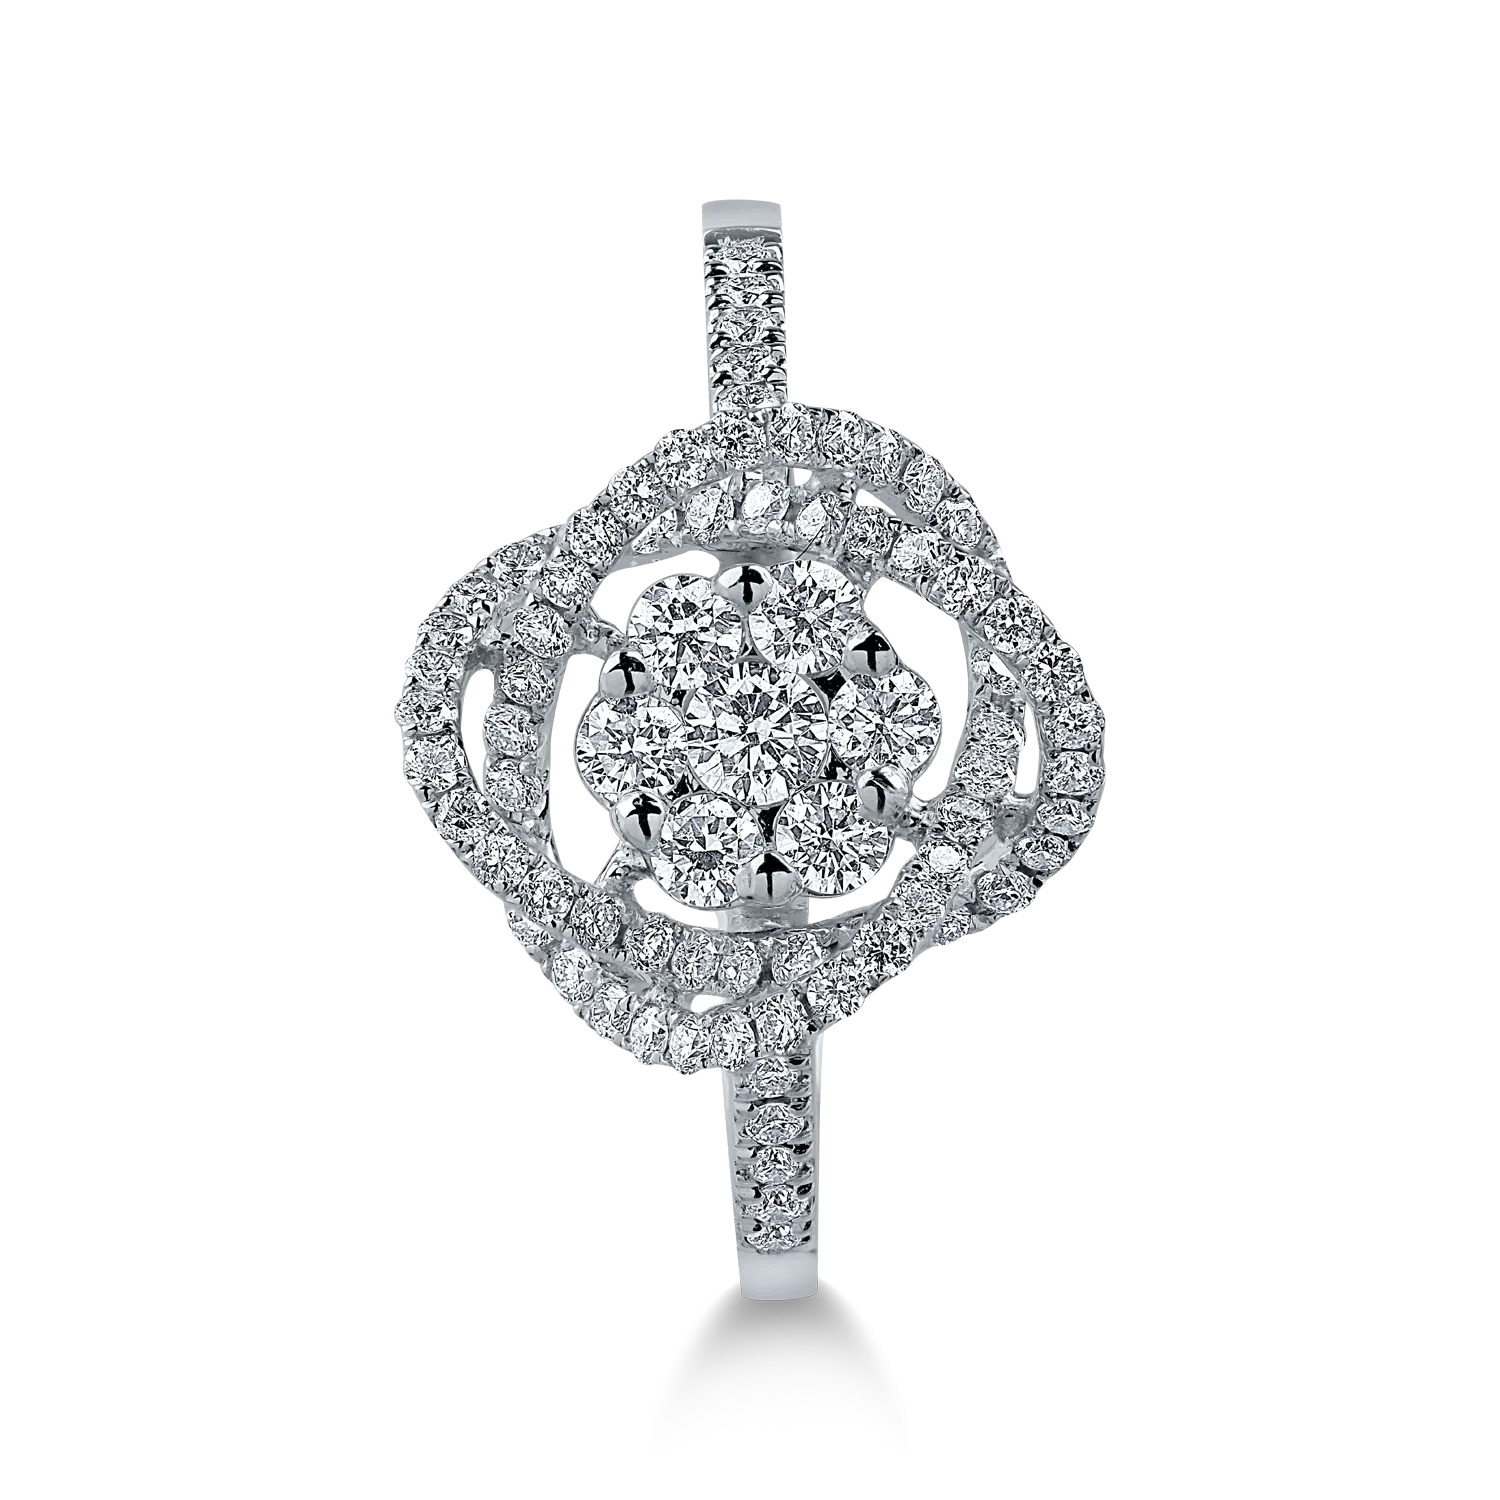 White gold ring with 0.61ct diamonds